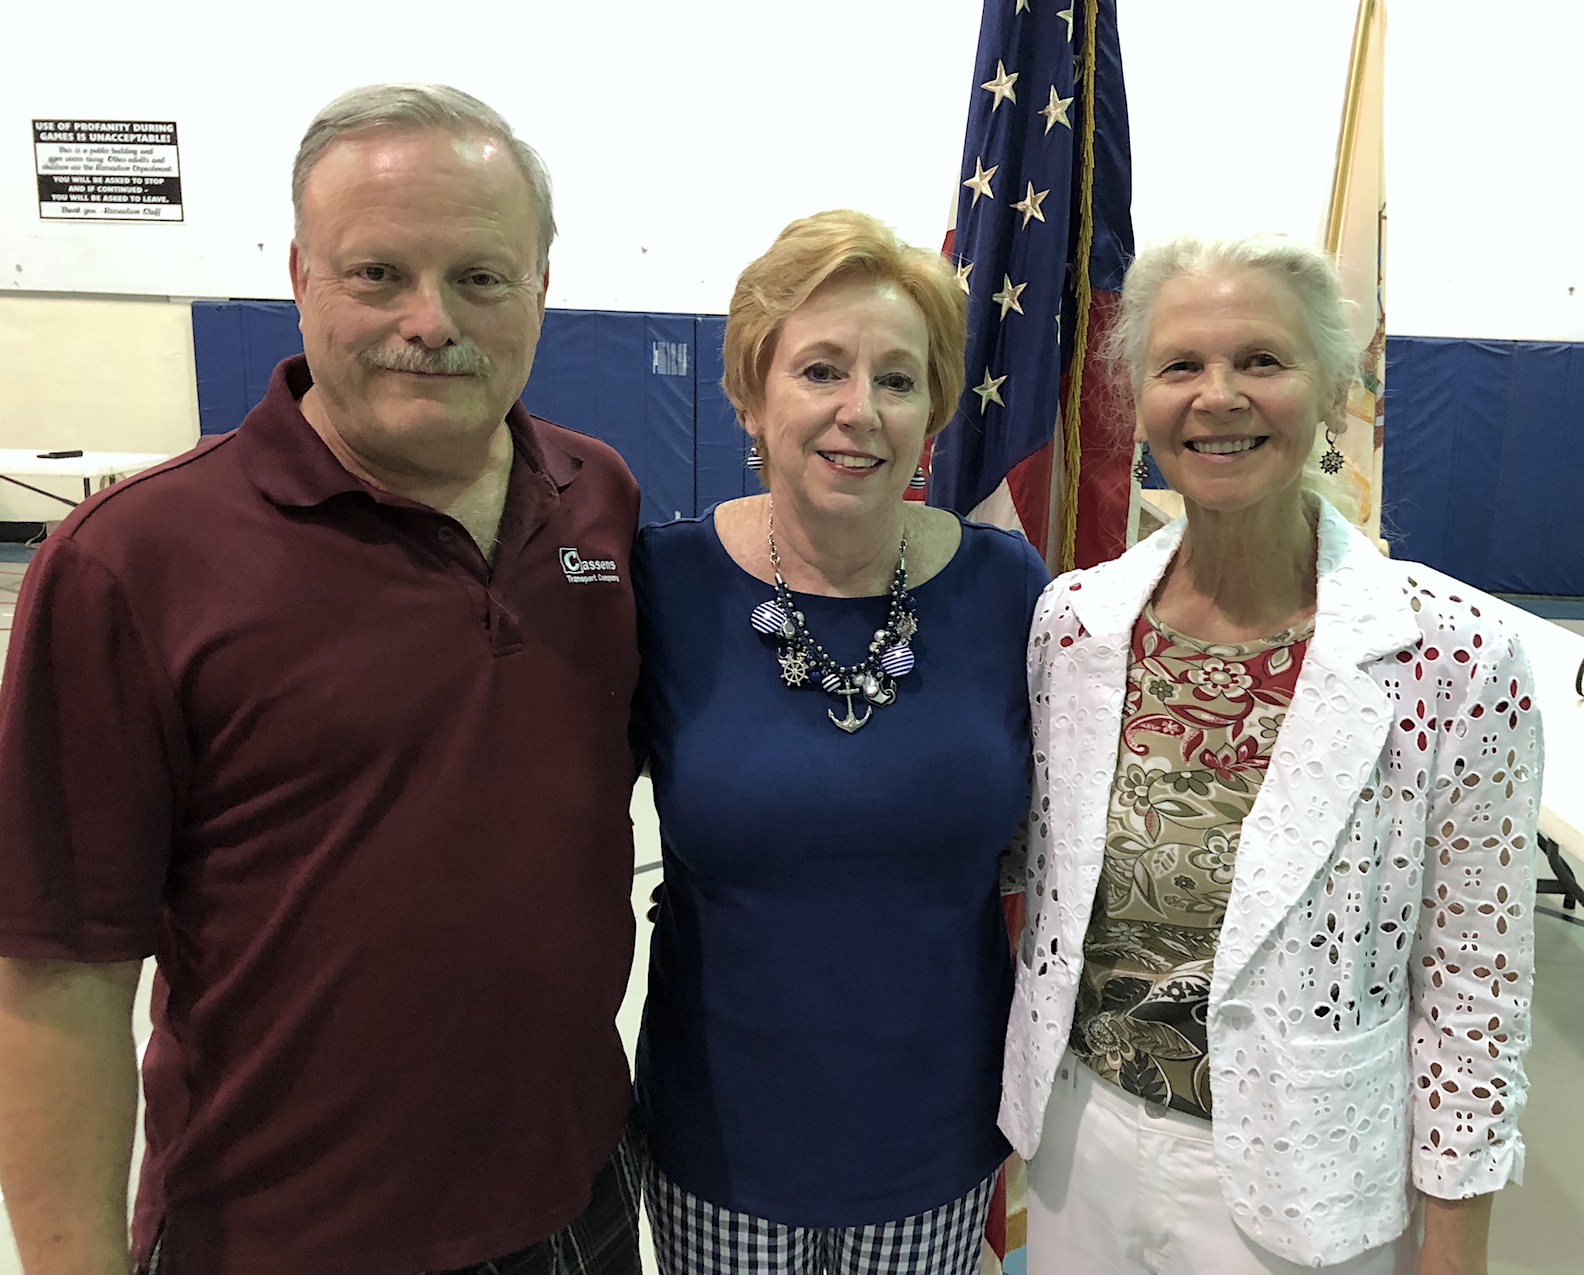 Pictured are the winners from Tuesday's Village of Lewiston election: Trustee Vic Eydt, Mayor-elect Anne Welch and Trustee-elect Claudia Marasco.